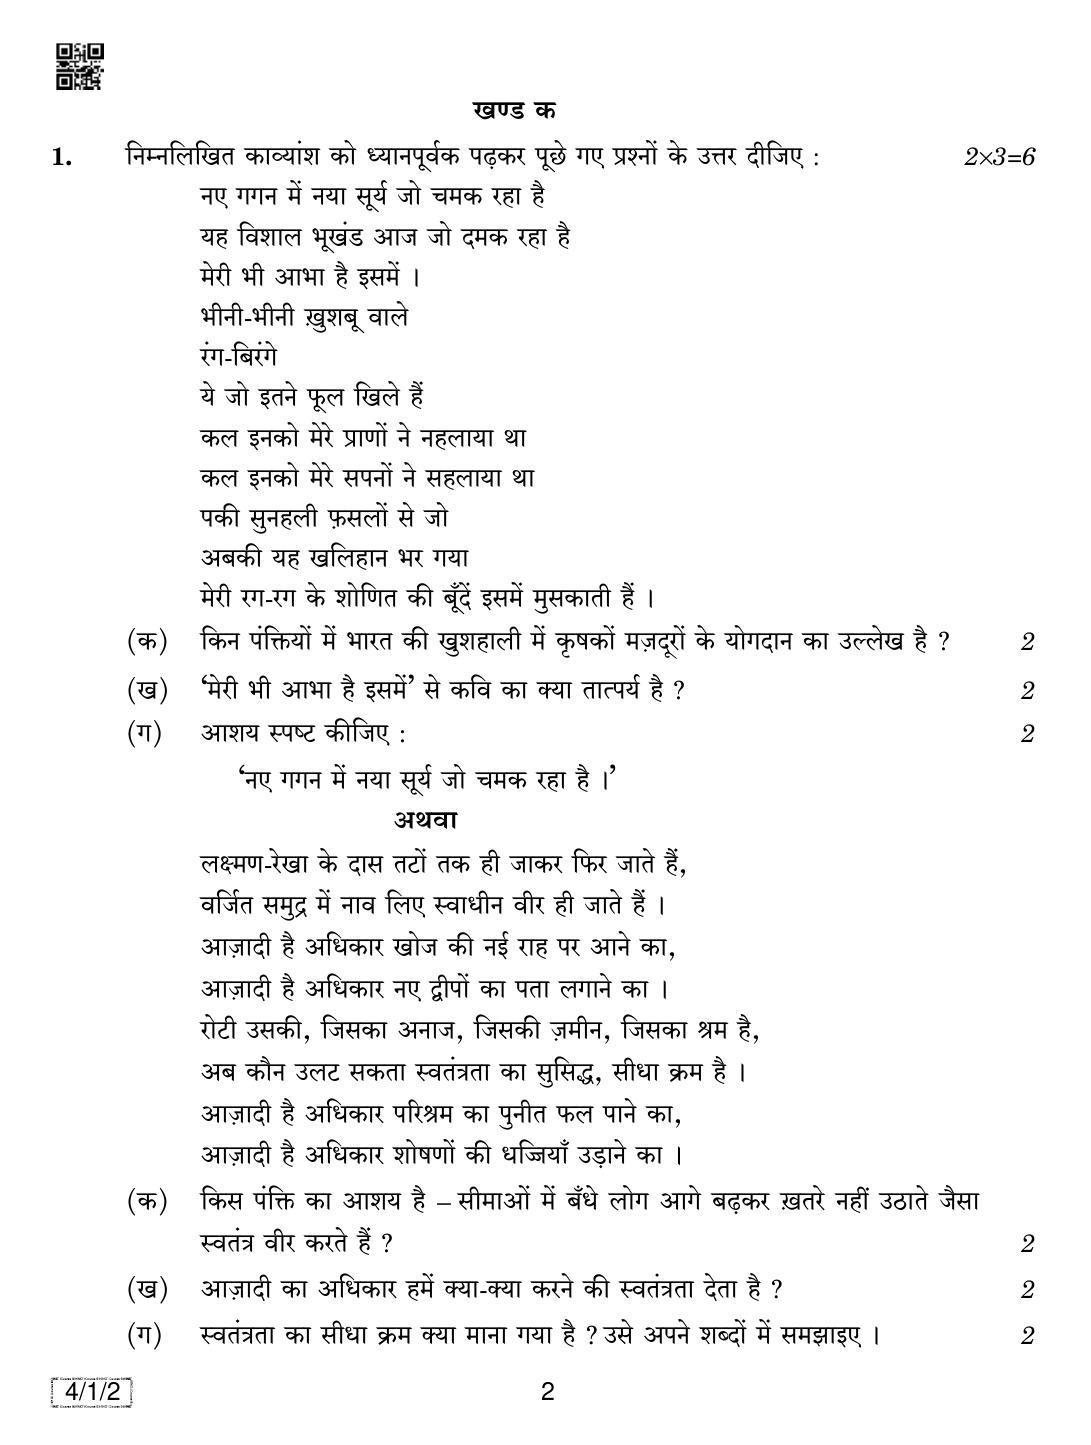 CBSE Class 10 4-1-2 HINDI B 2019 Compartment Question Paper - Page 2